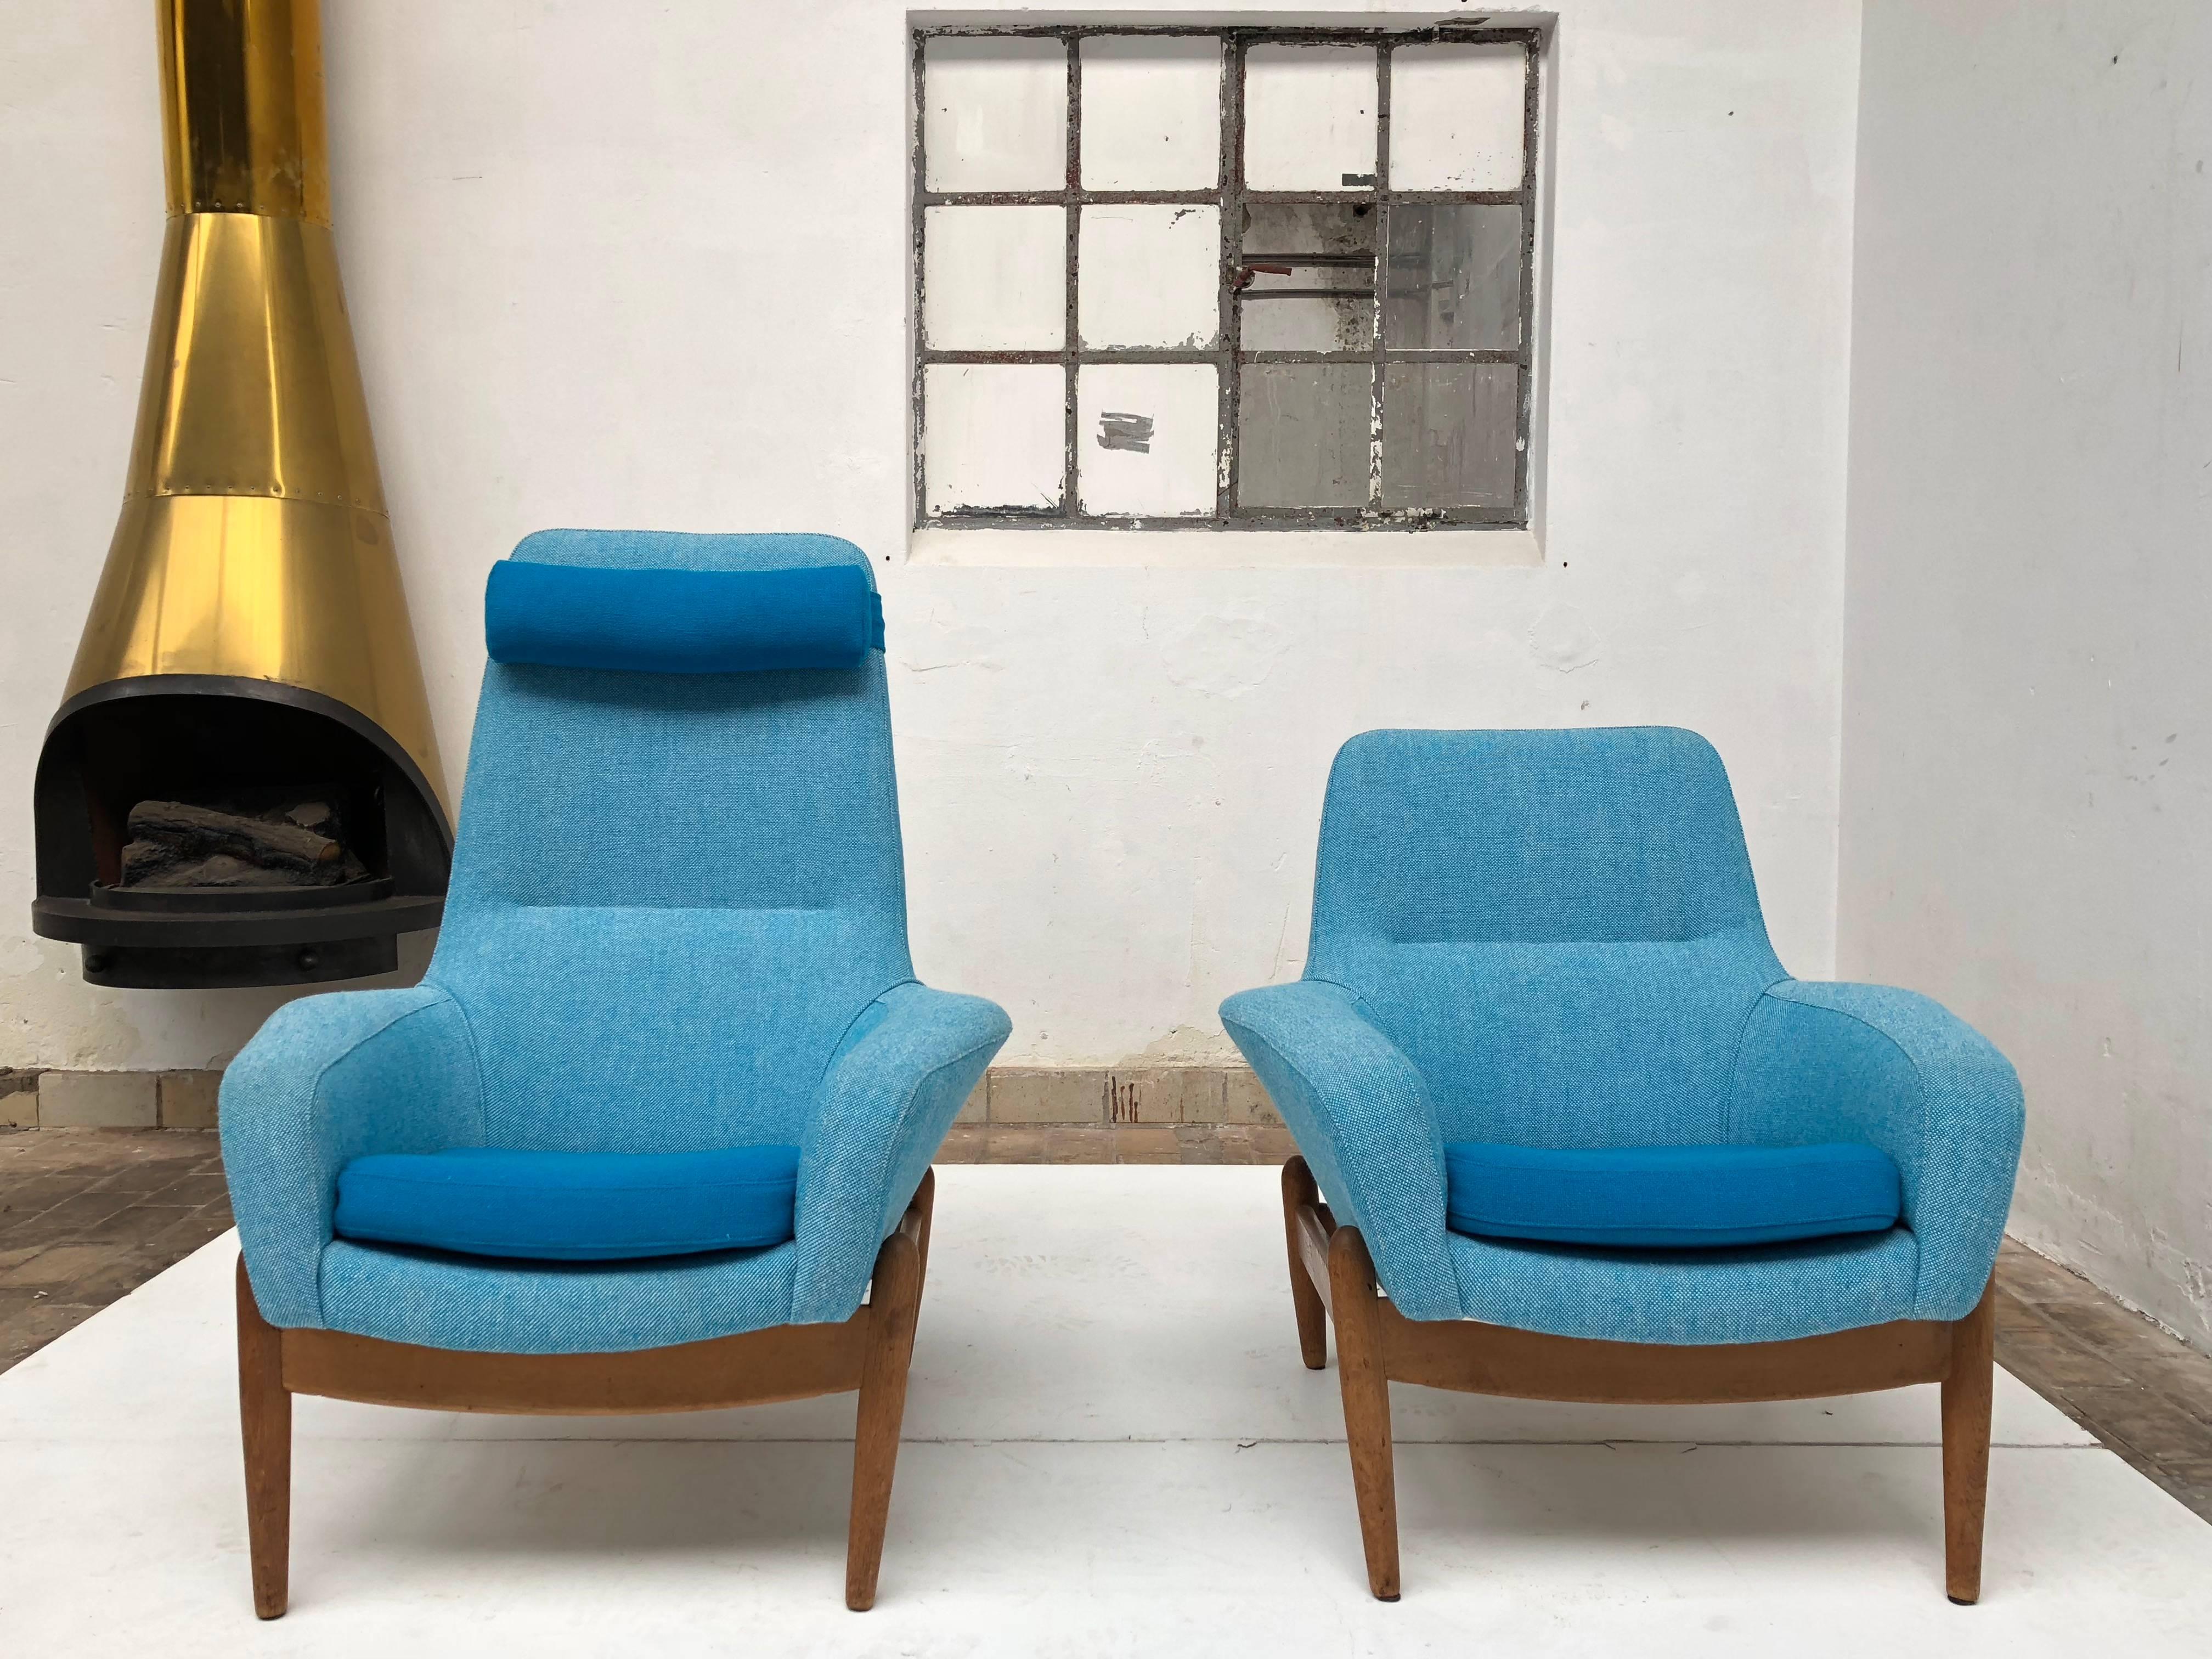 Pair of Danish design lounge chairs by designers Arnold Madsen & Henri Schubell that were distributed in the Netherlands by Bovenkamp in the 1950's and 1960's

Beautiful organic carved solid oak wood frames and newly upholstered in a Turquoise /